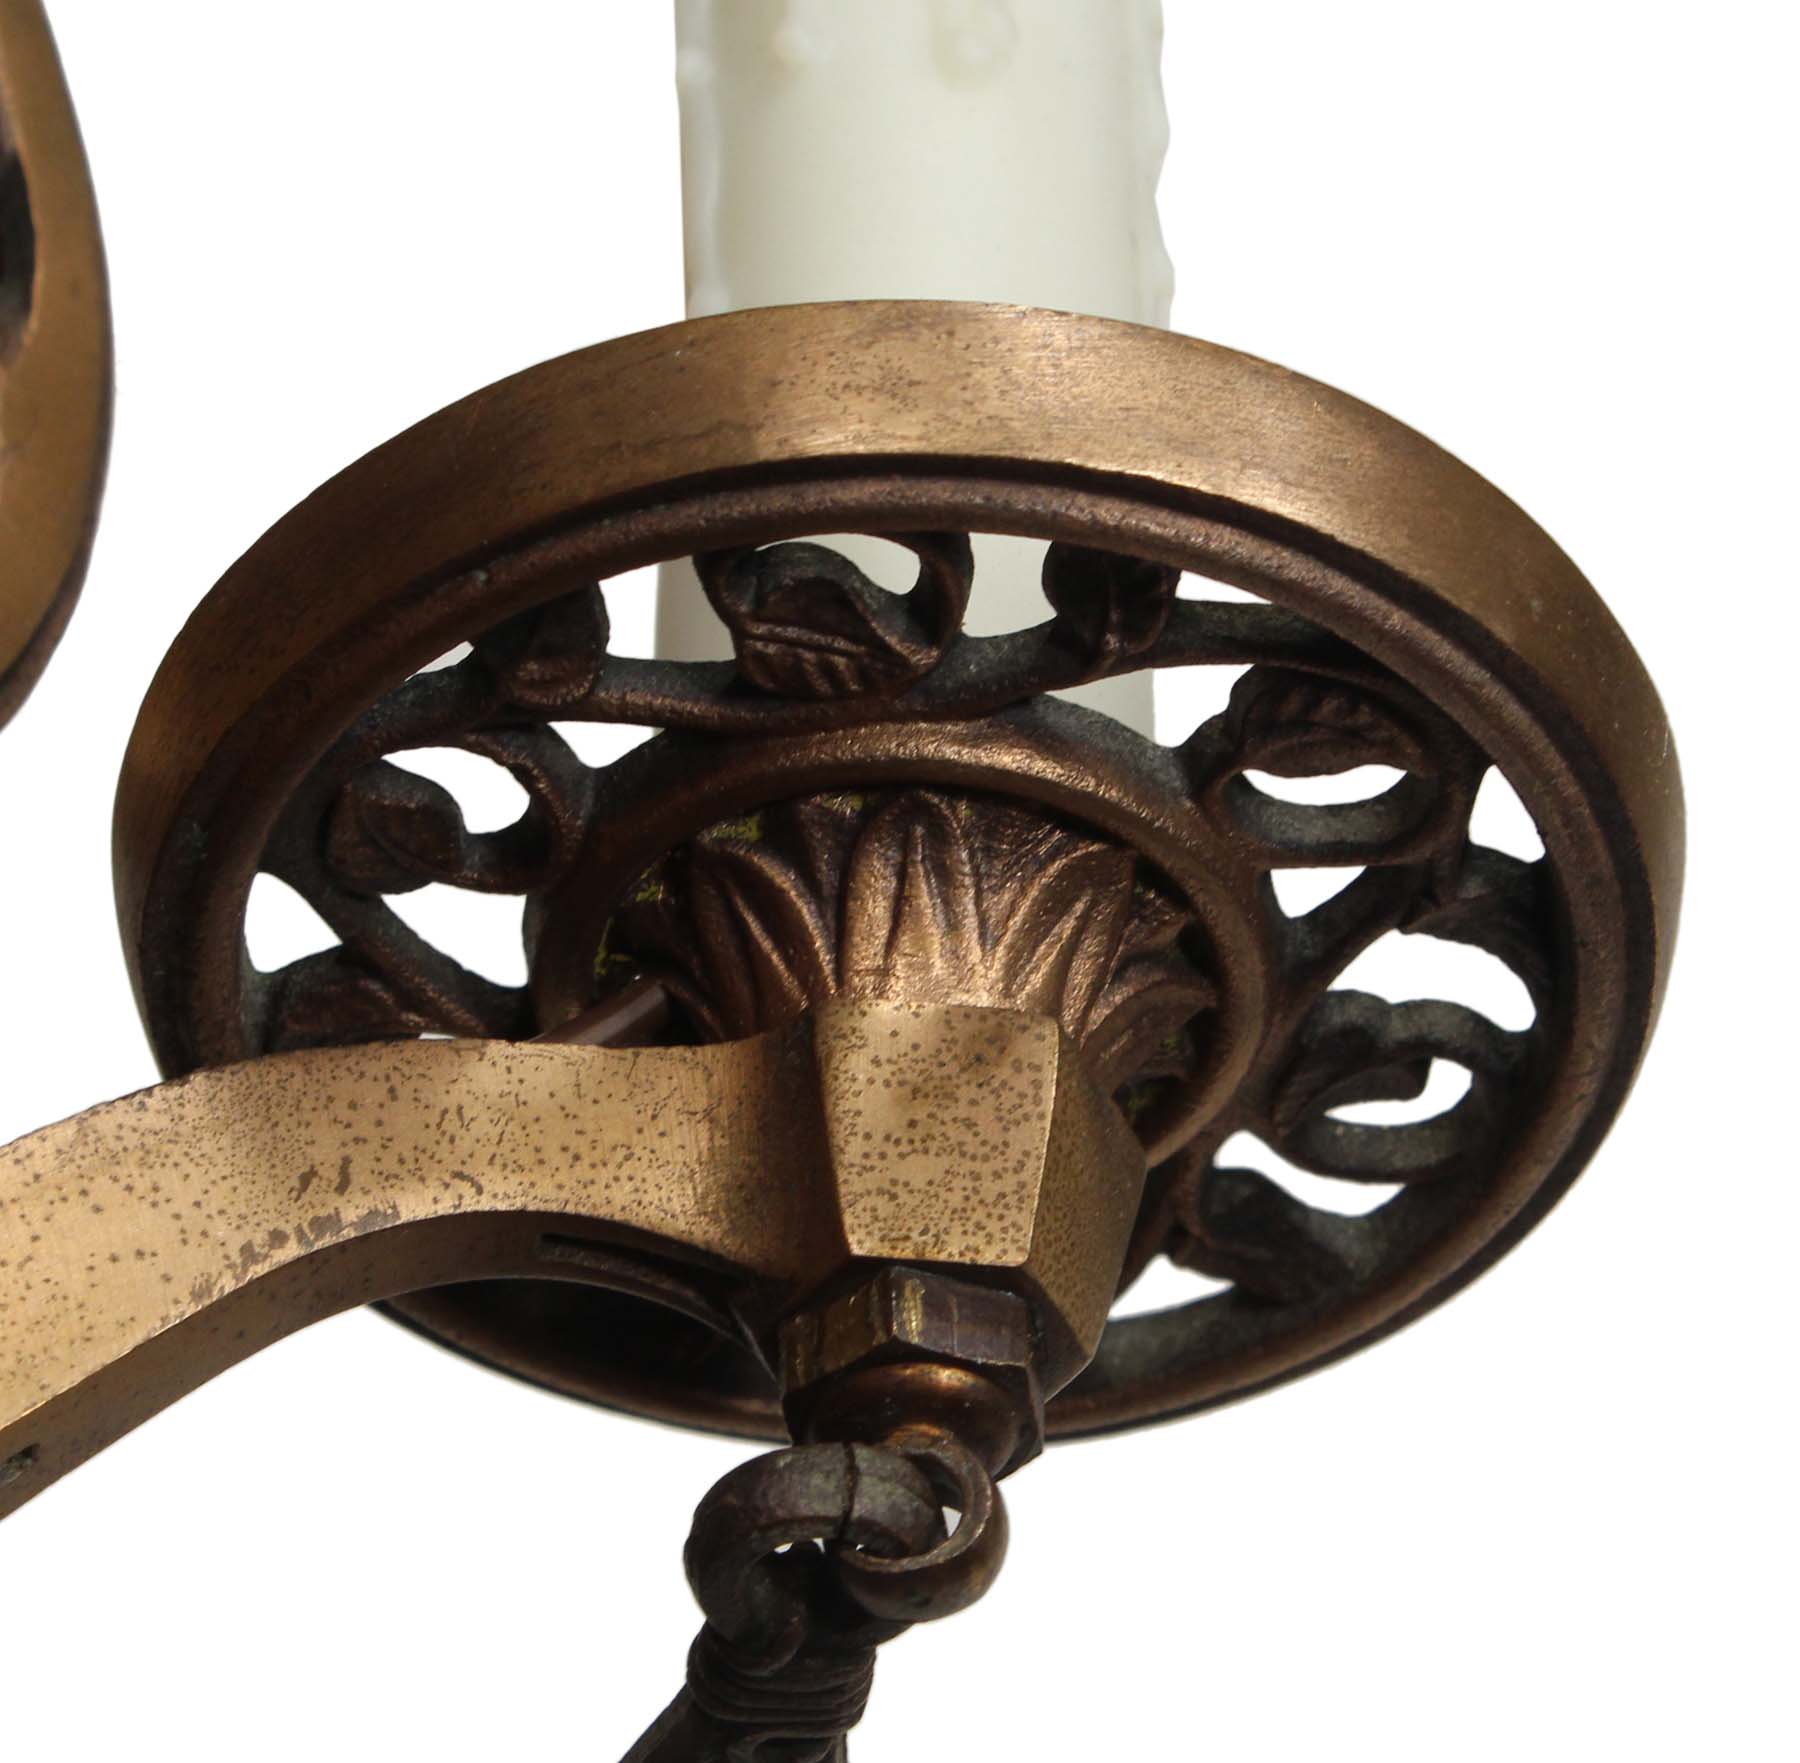 SOLD Matching Antique Cast Bronze Sconces with Mica, c. 1920s -68559